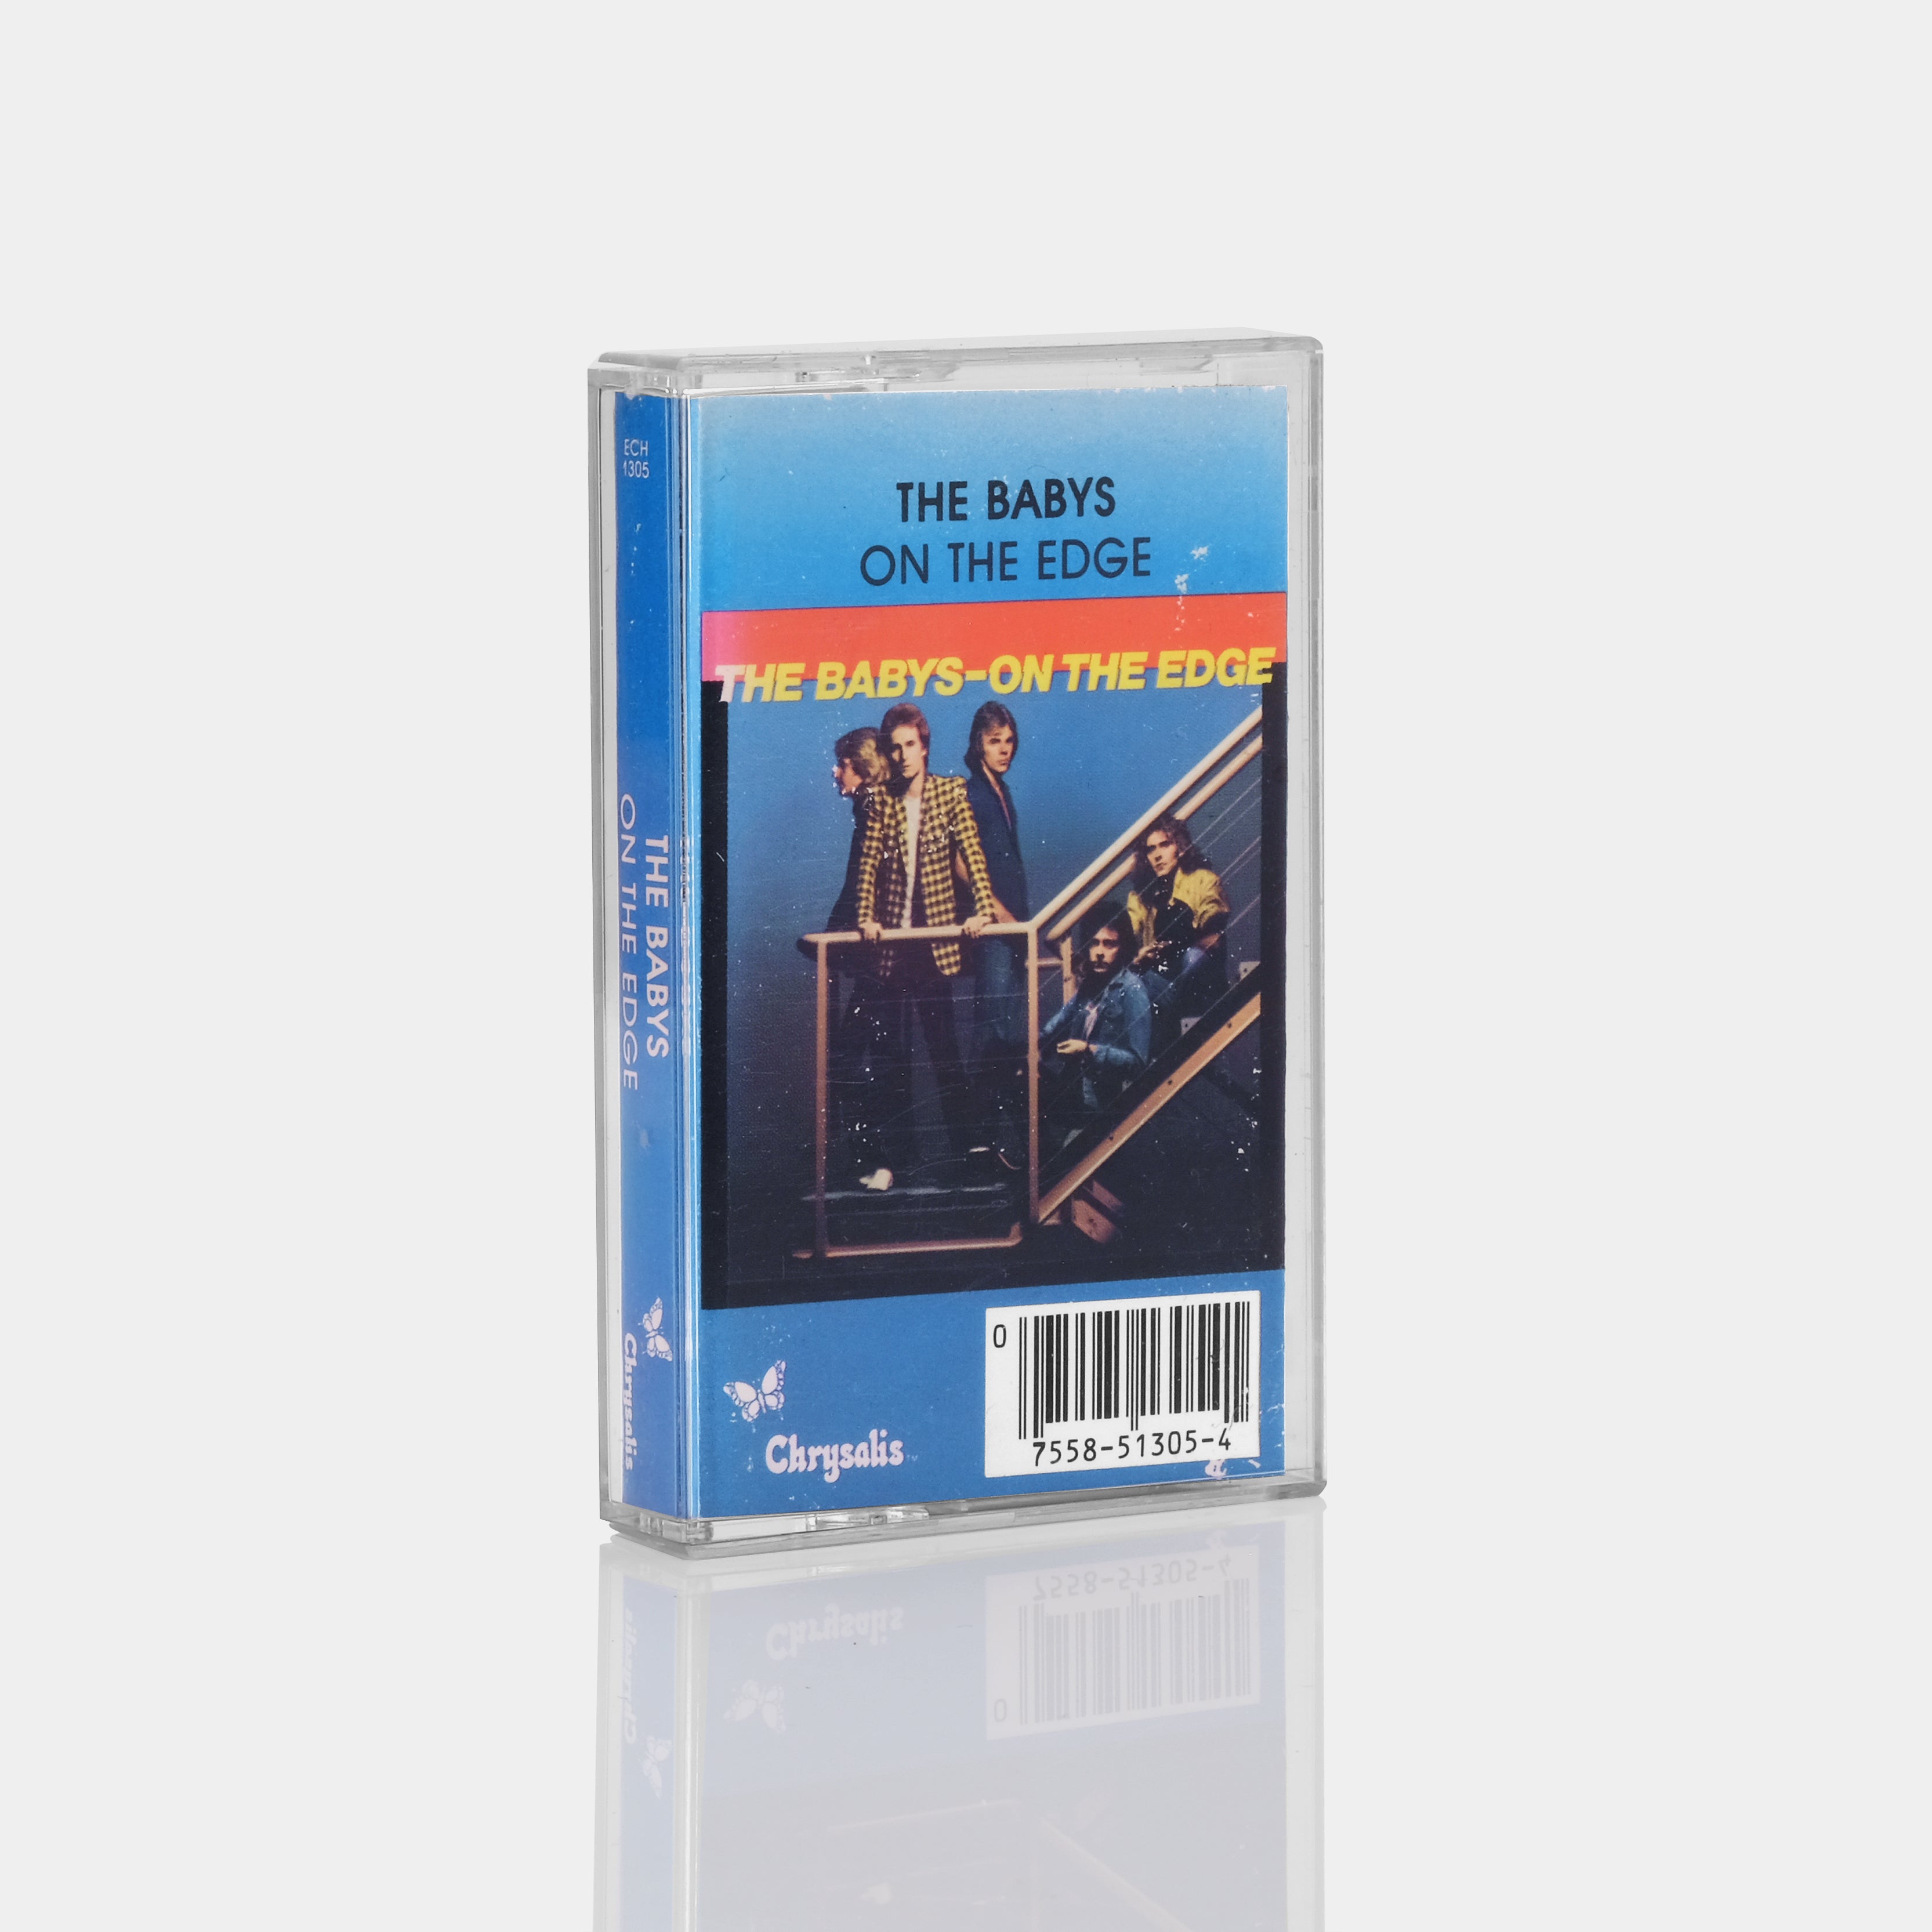 The Baby's - On The Edge Cassette Tape